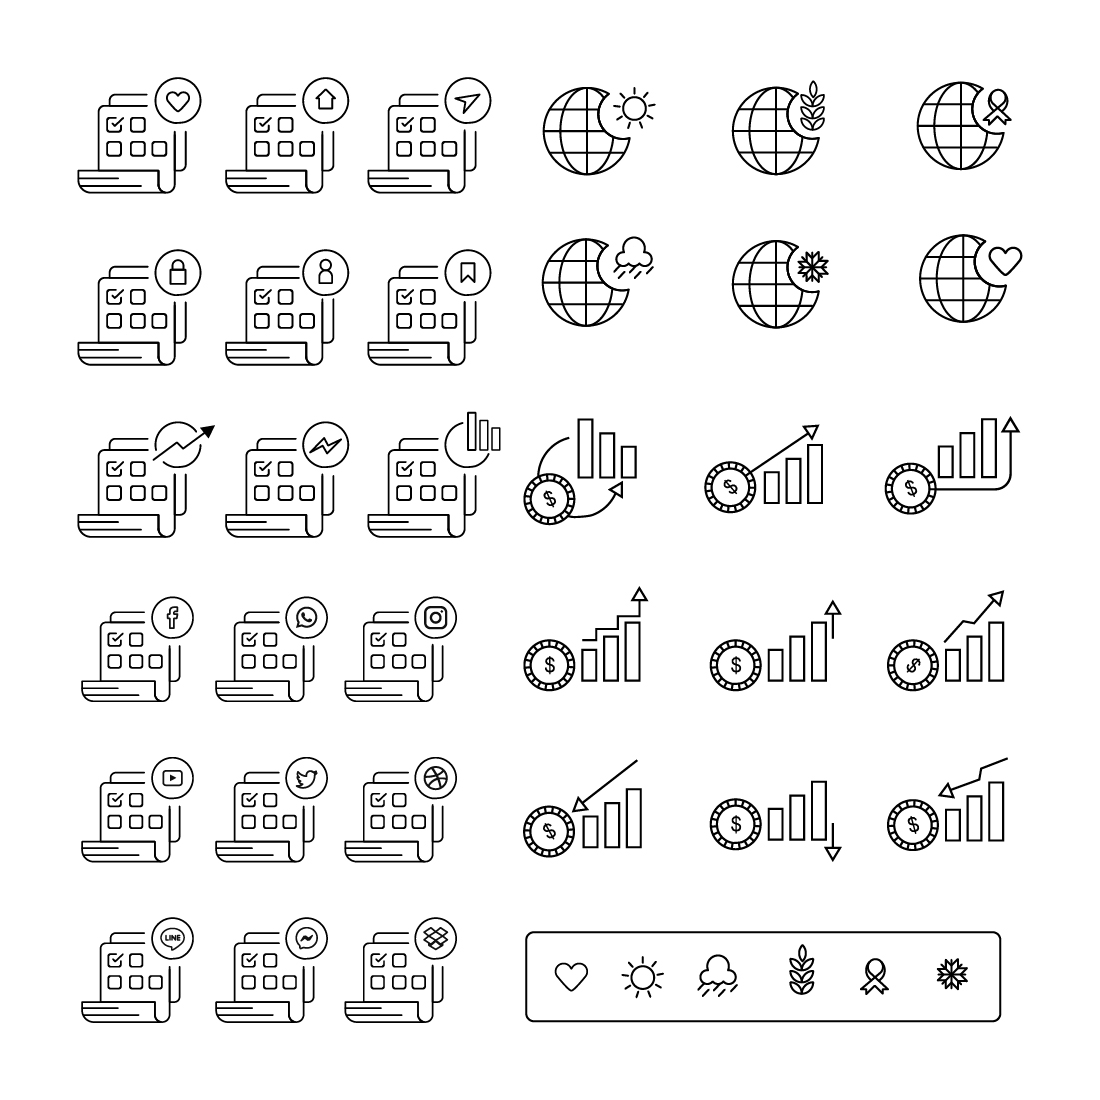 Set of line icons with different symbols.